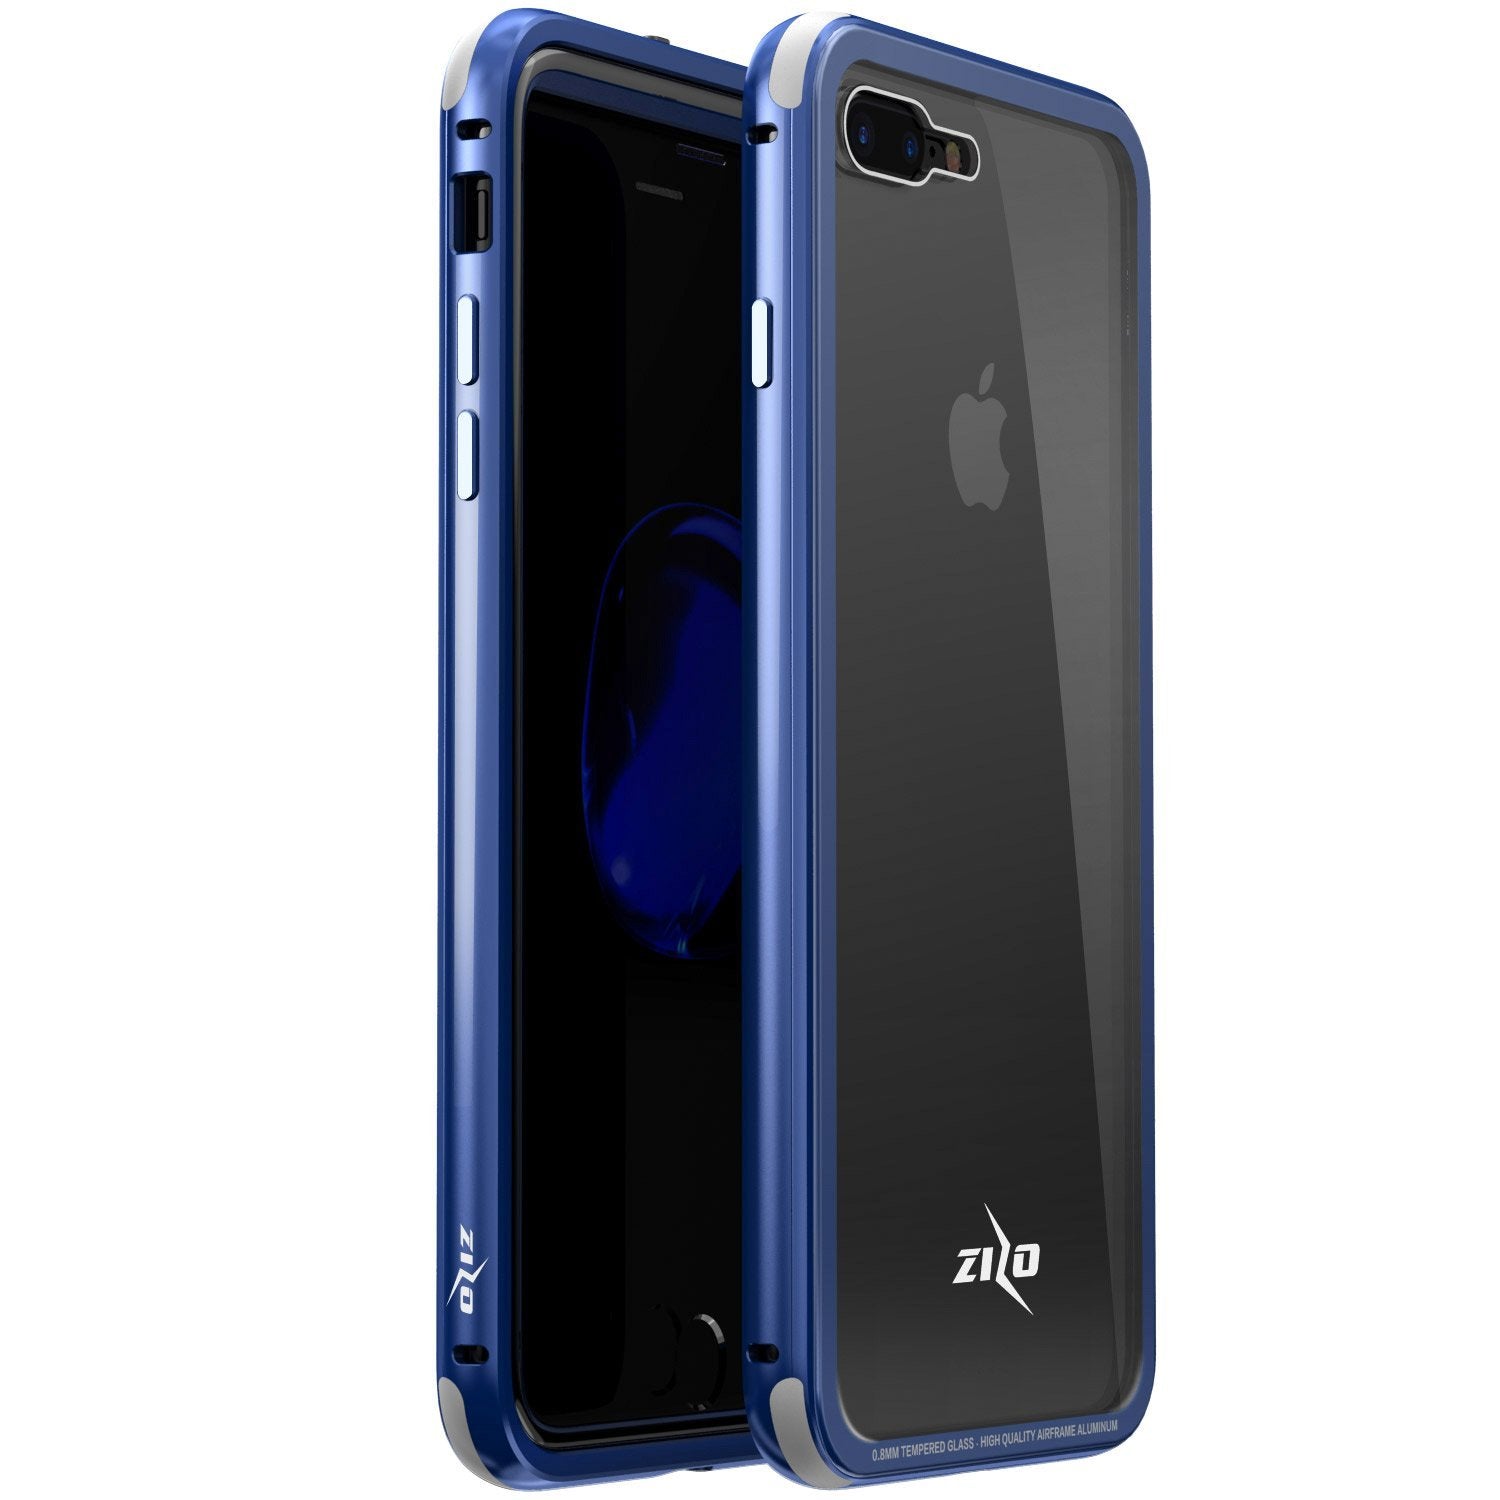 Zizo Atom Case for iPhone 8 Plus  Tempered Glass Screen Protector and